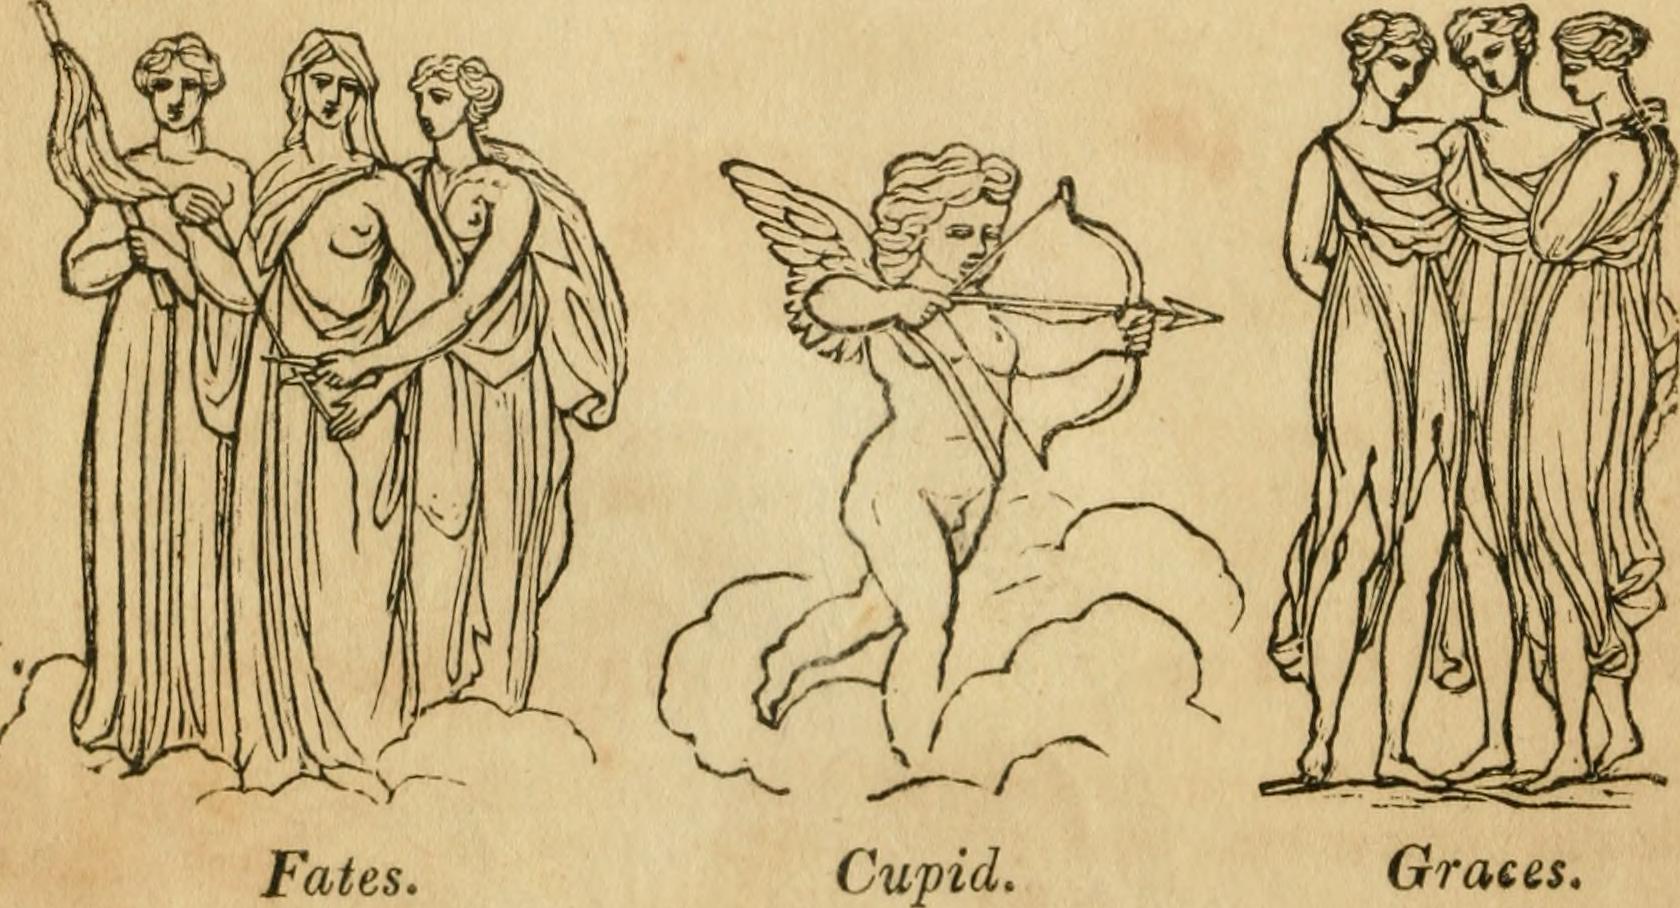 An archaic illustration with Muses, Cupid, & Fates